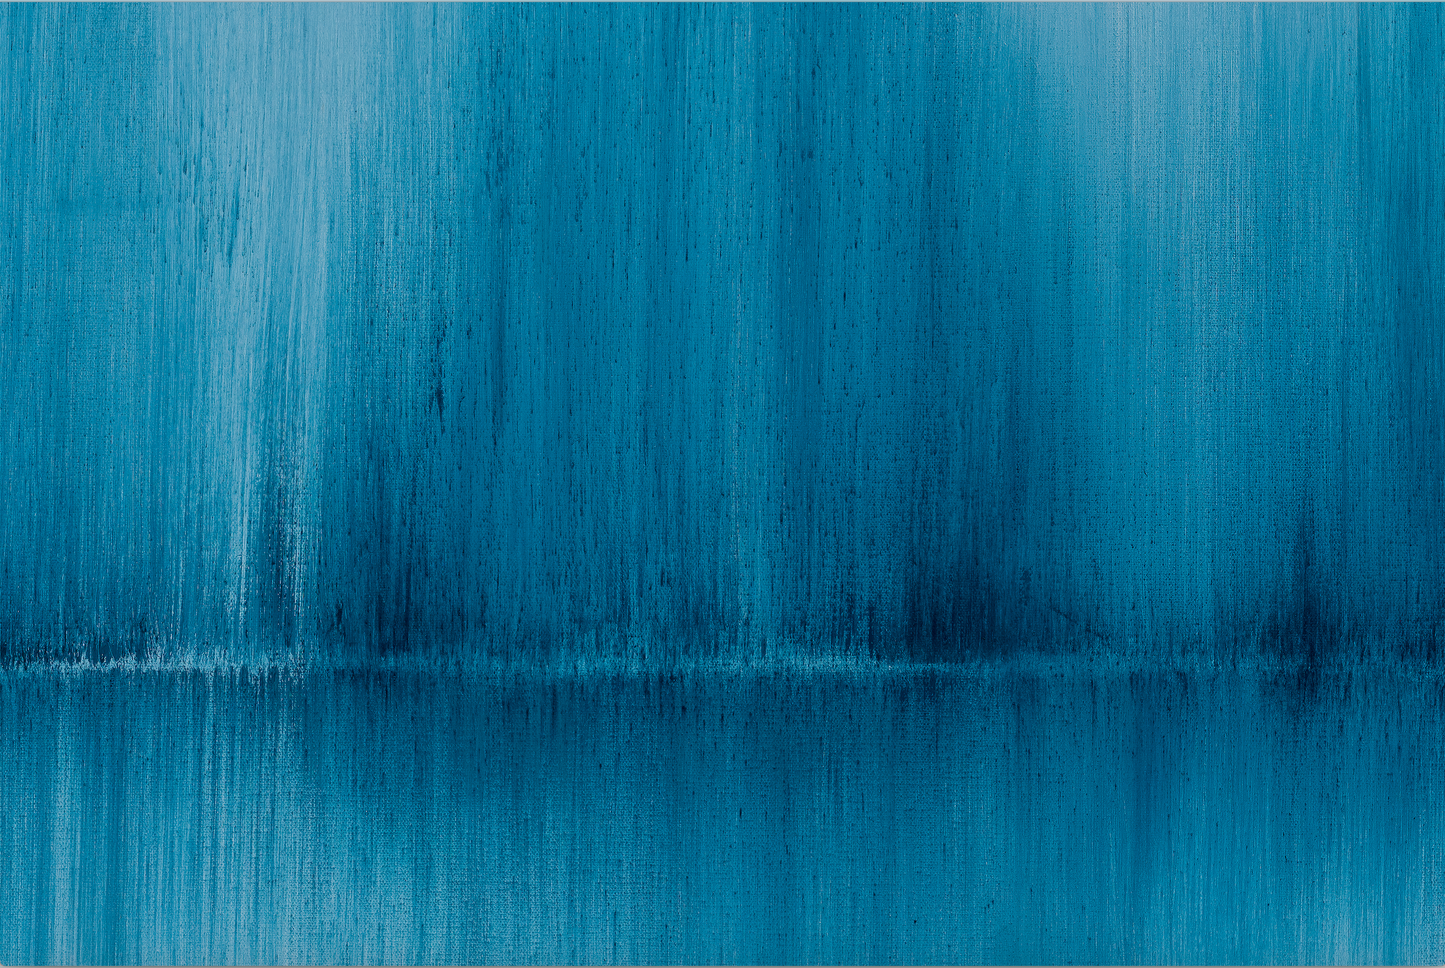 Echoes, Frequency of Loss - 48 x 72 (ORIGINAL)